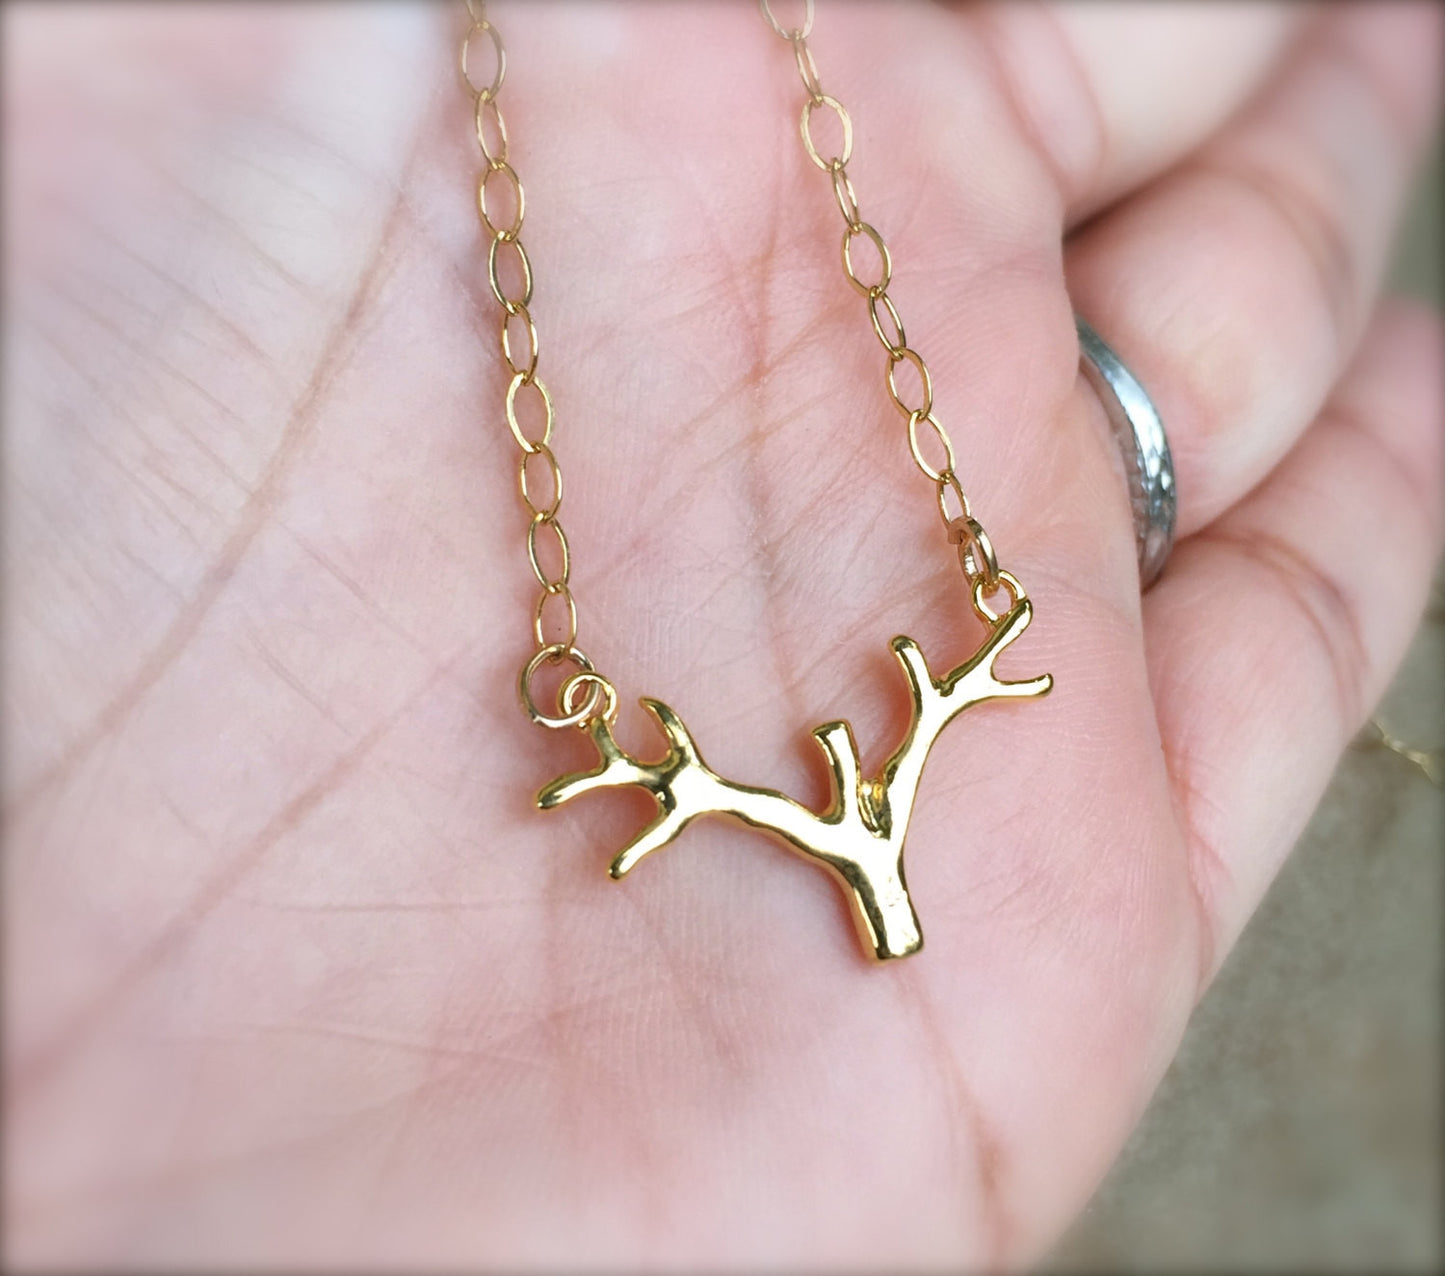 Gold Antler Necklace, Minimal Jewelry, Necklace, Natashaaloha - Natashaaloha, jewelry, bracelets, necklace, keychains, fishing lures, gifts for men, charms, personalized, 